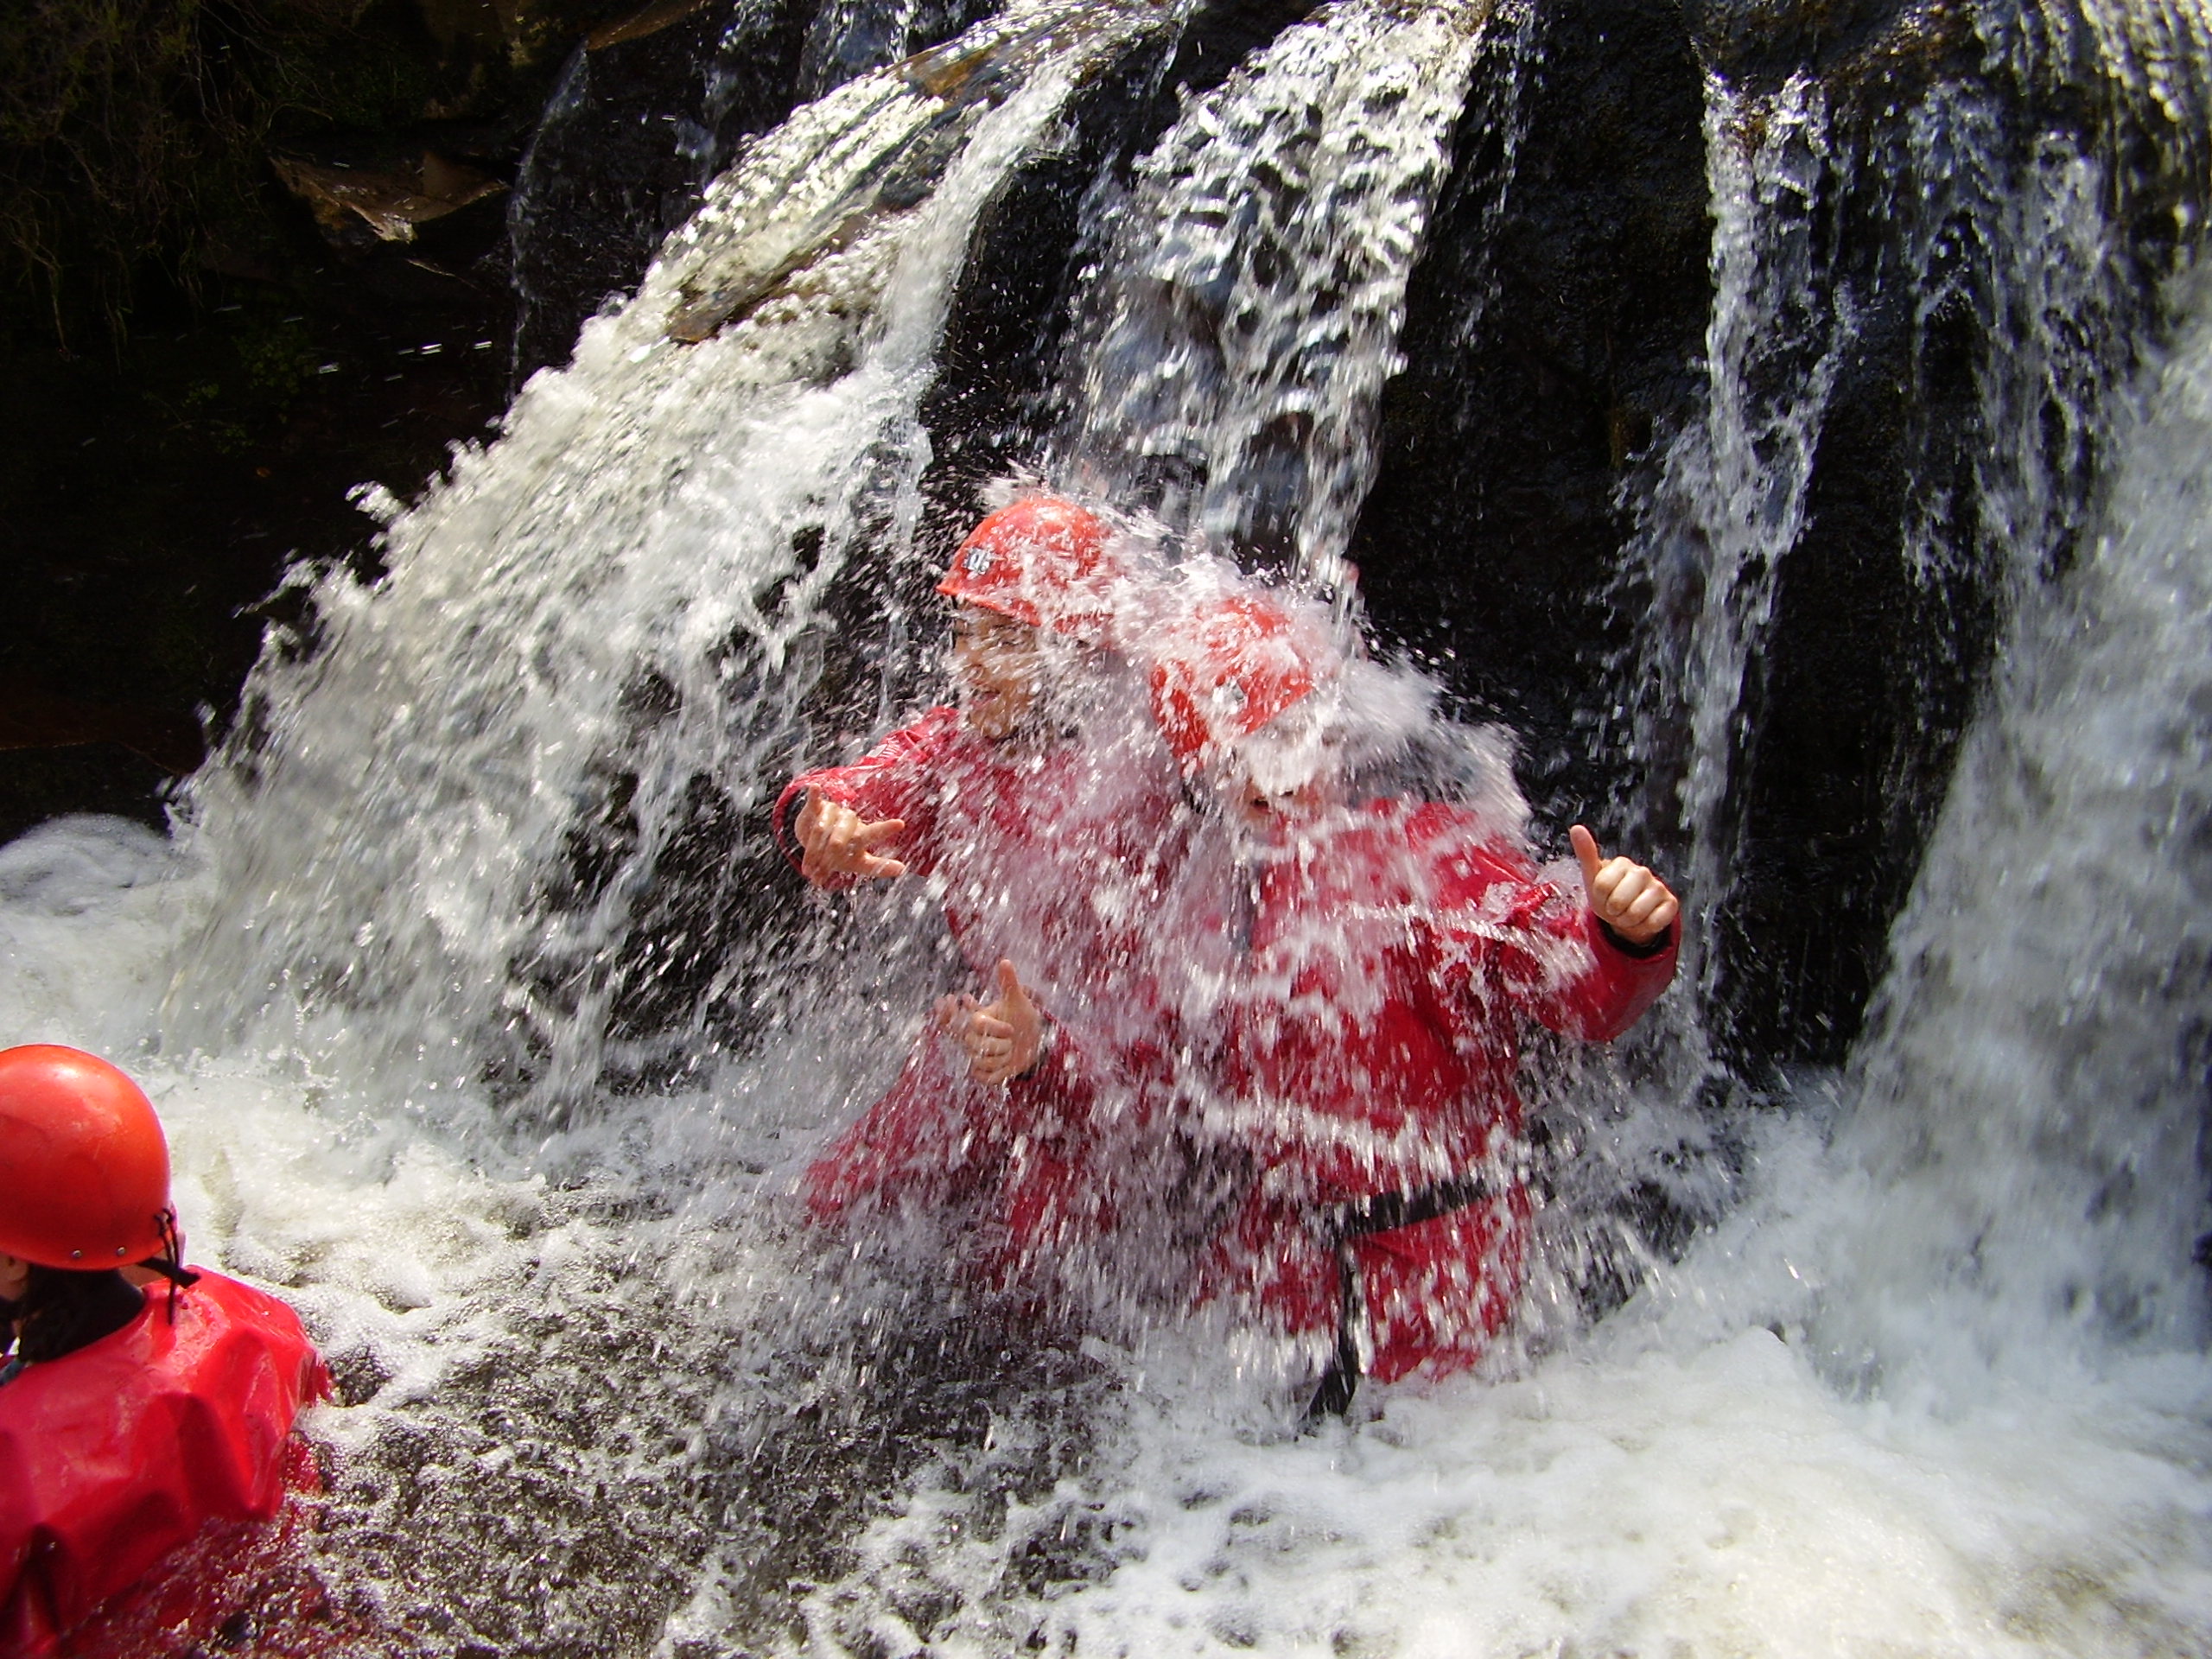 Gorge Scrambling for school groups